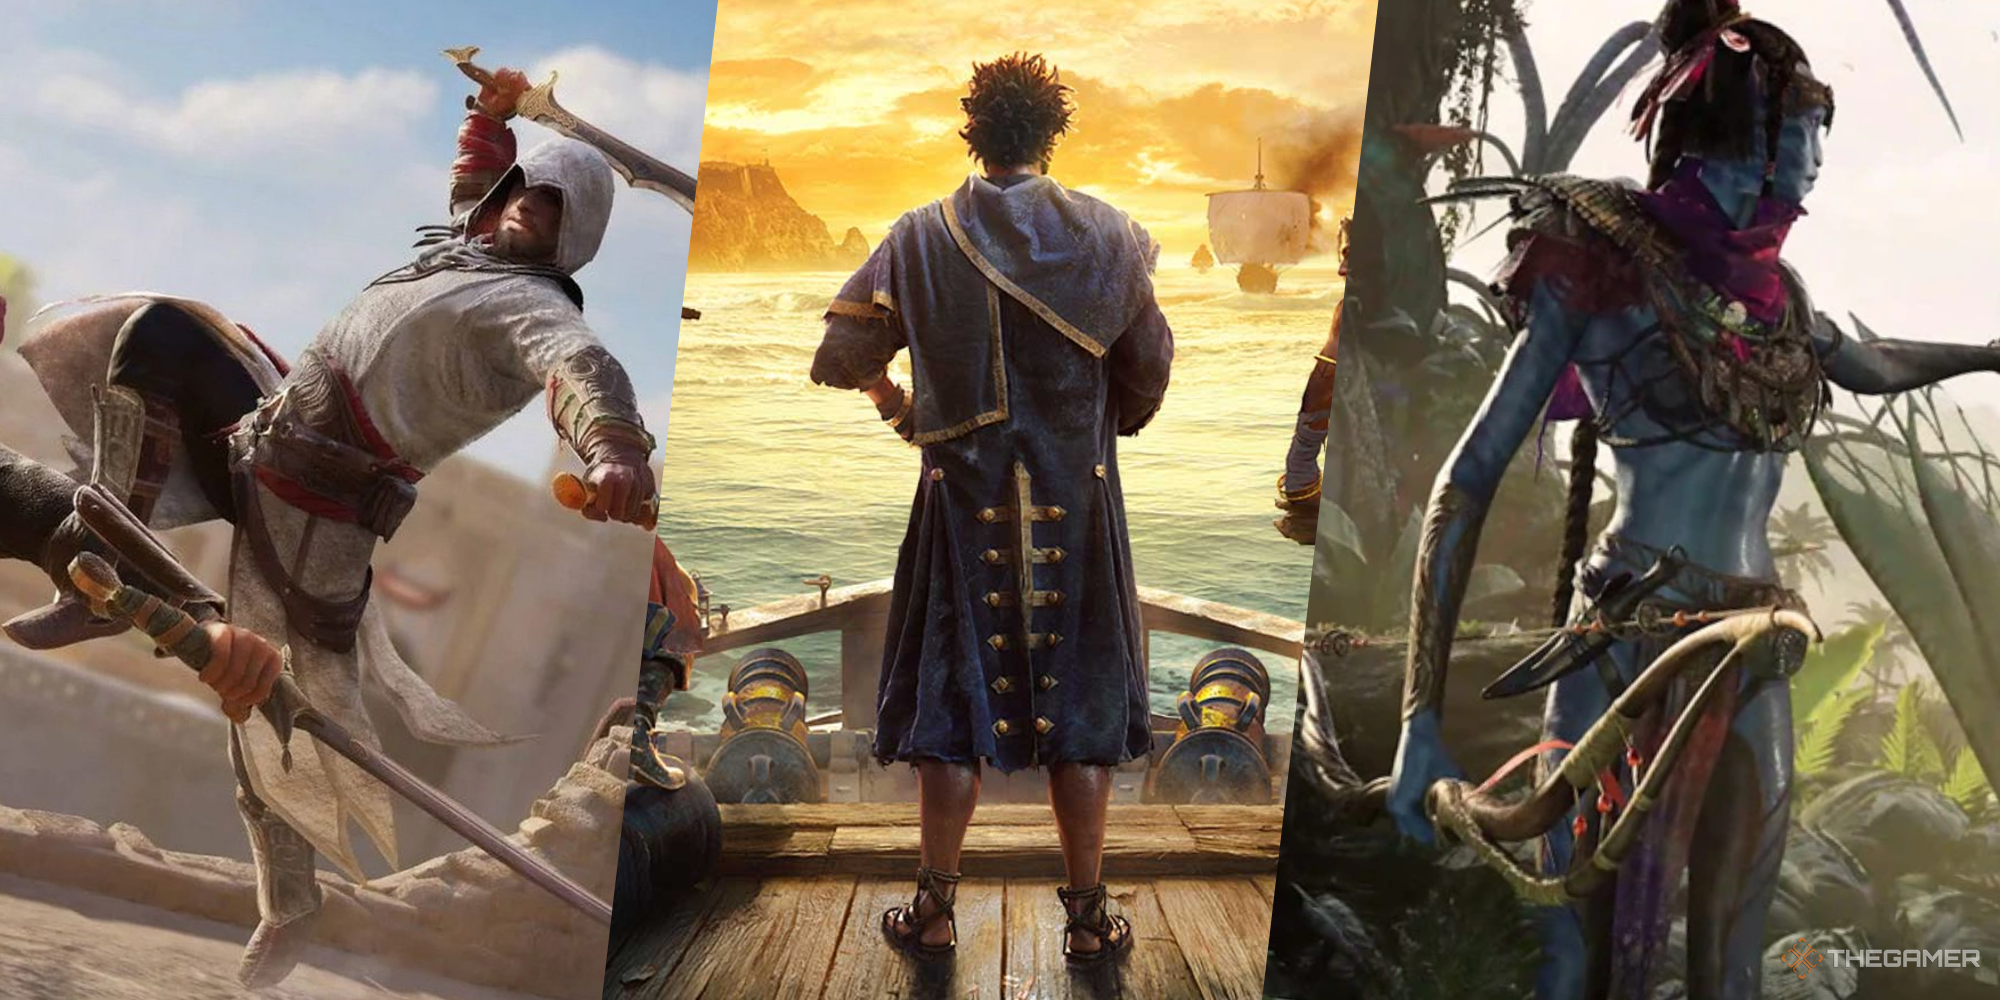 With Skull and Bones now set for March 2023, could Assassin's Creed Mirage  get delayed to second half of next year?